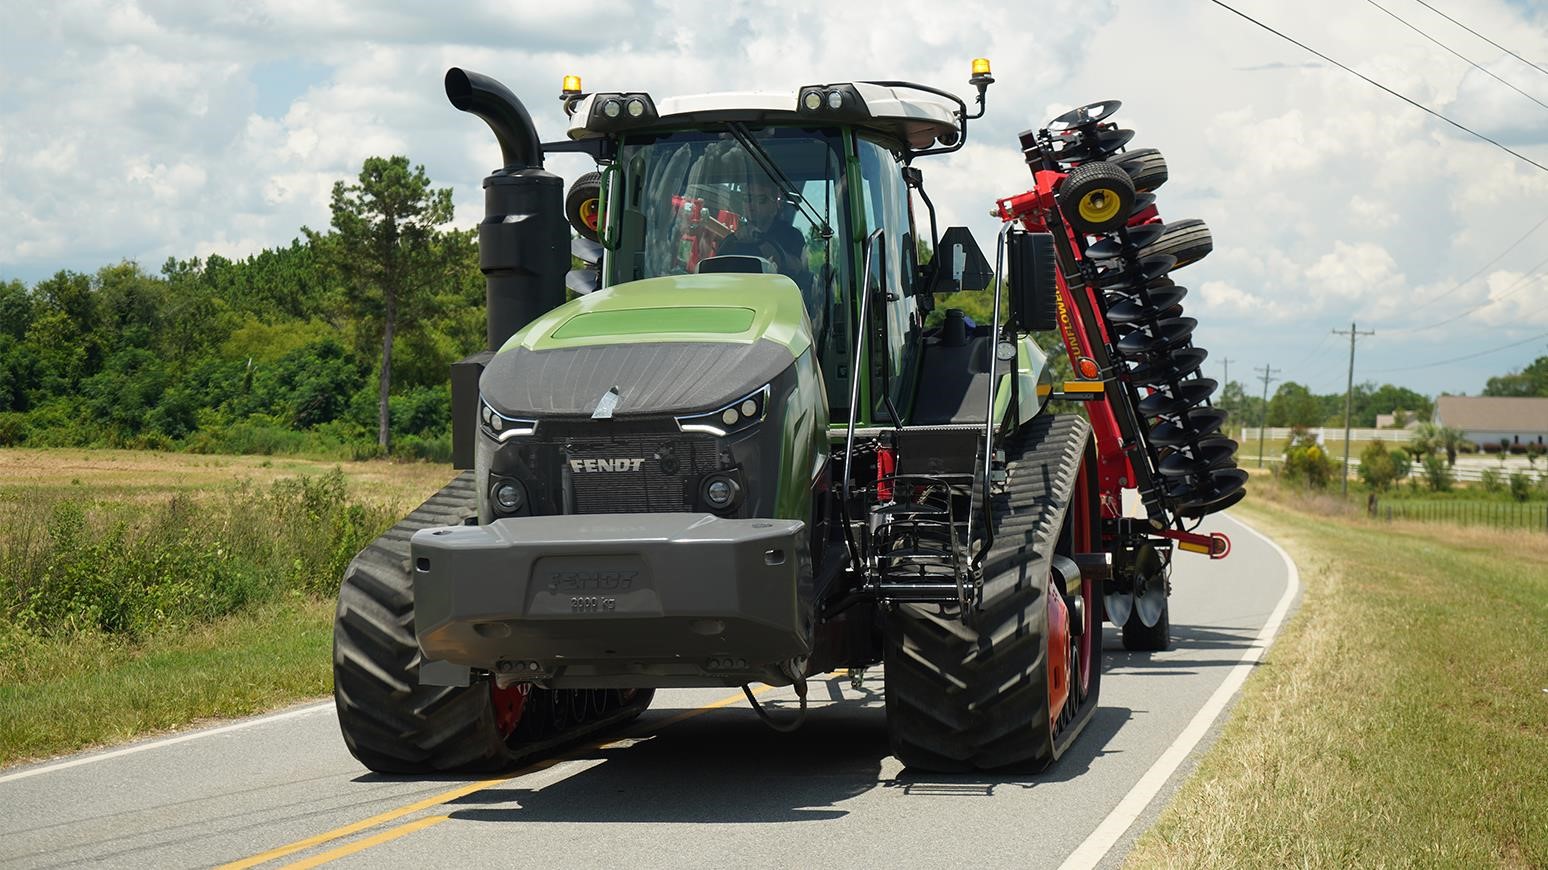 Fendt 1100 Vario MT: A New Family Of Two-Track Tractors For North America